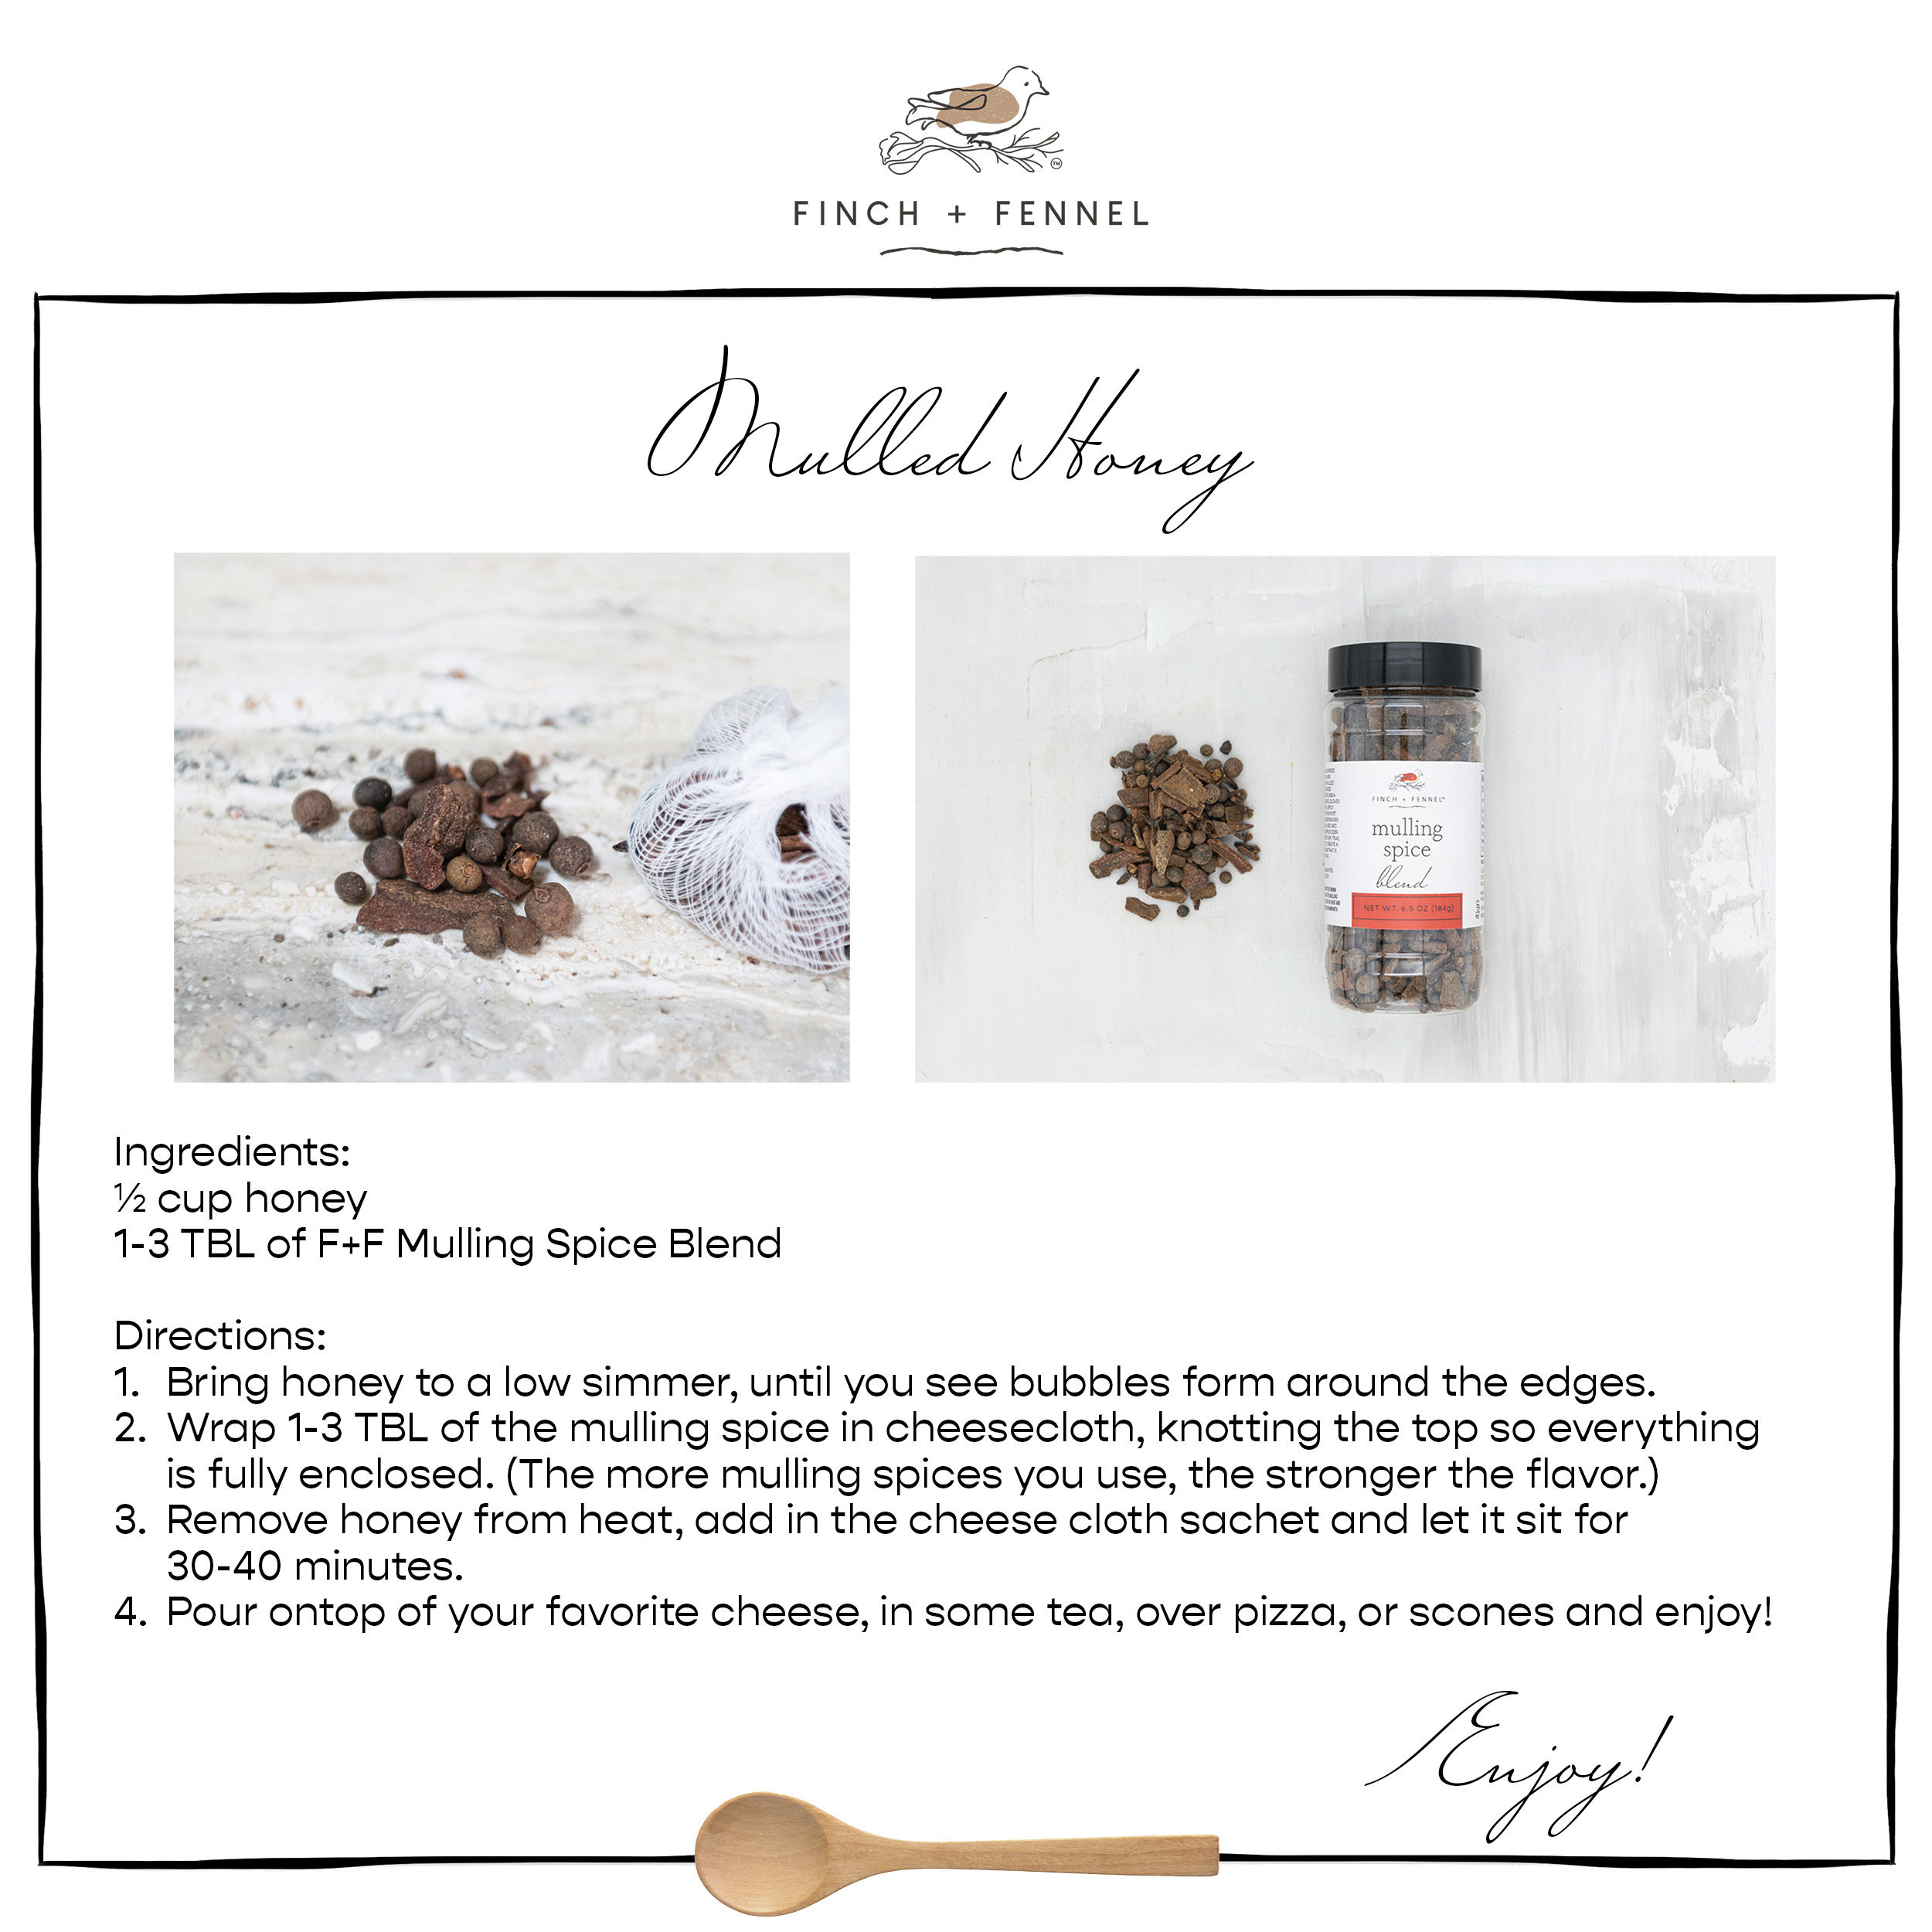 Mulled Honey

Ingredients:
½ cup honey 
1-3 TBL of F+F Mulling Spice Blend

Directions:	
1.	Bring honey to a low simmer, until you see bubbles form around the edges.  
2.	Wrap 1-3 TBL of the mulling spice in cheesecloth, knotting the top so everything is fully enclosed. (The more mulling spices you use, the stronger the flavor.)
3.	Remove honey from heat, add in the cheese cloth sachet and let it sit for 30-40 minutes. 
4.	Pour ontop of your favorite cheese, in some tea, over pizza, or scones and enjoy!

Enjoy!